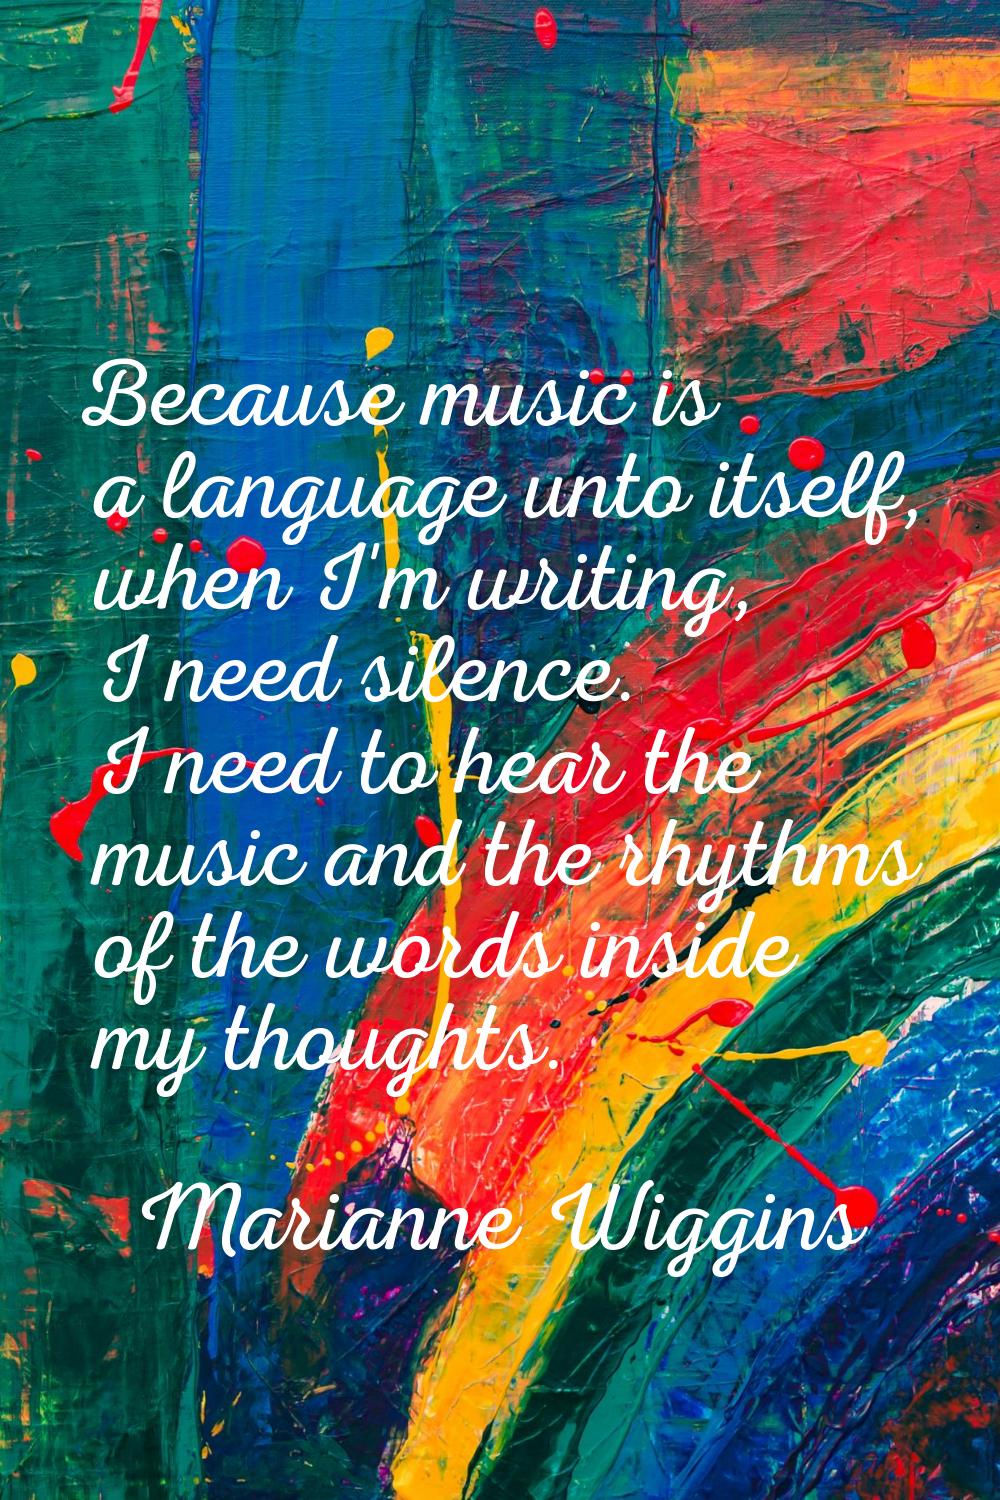 Because music is a language unto itself, when I'm writing, I need silence. I need to hear the music